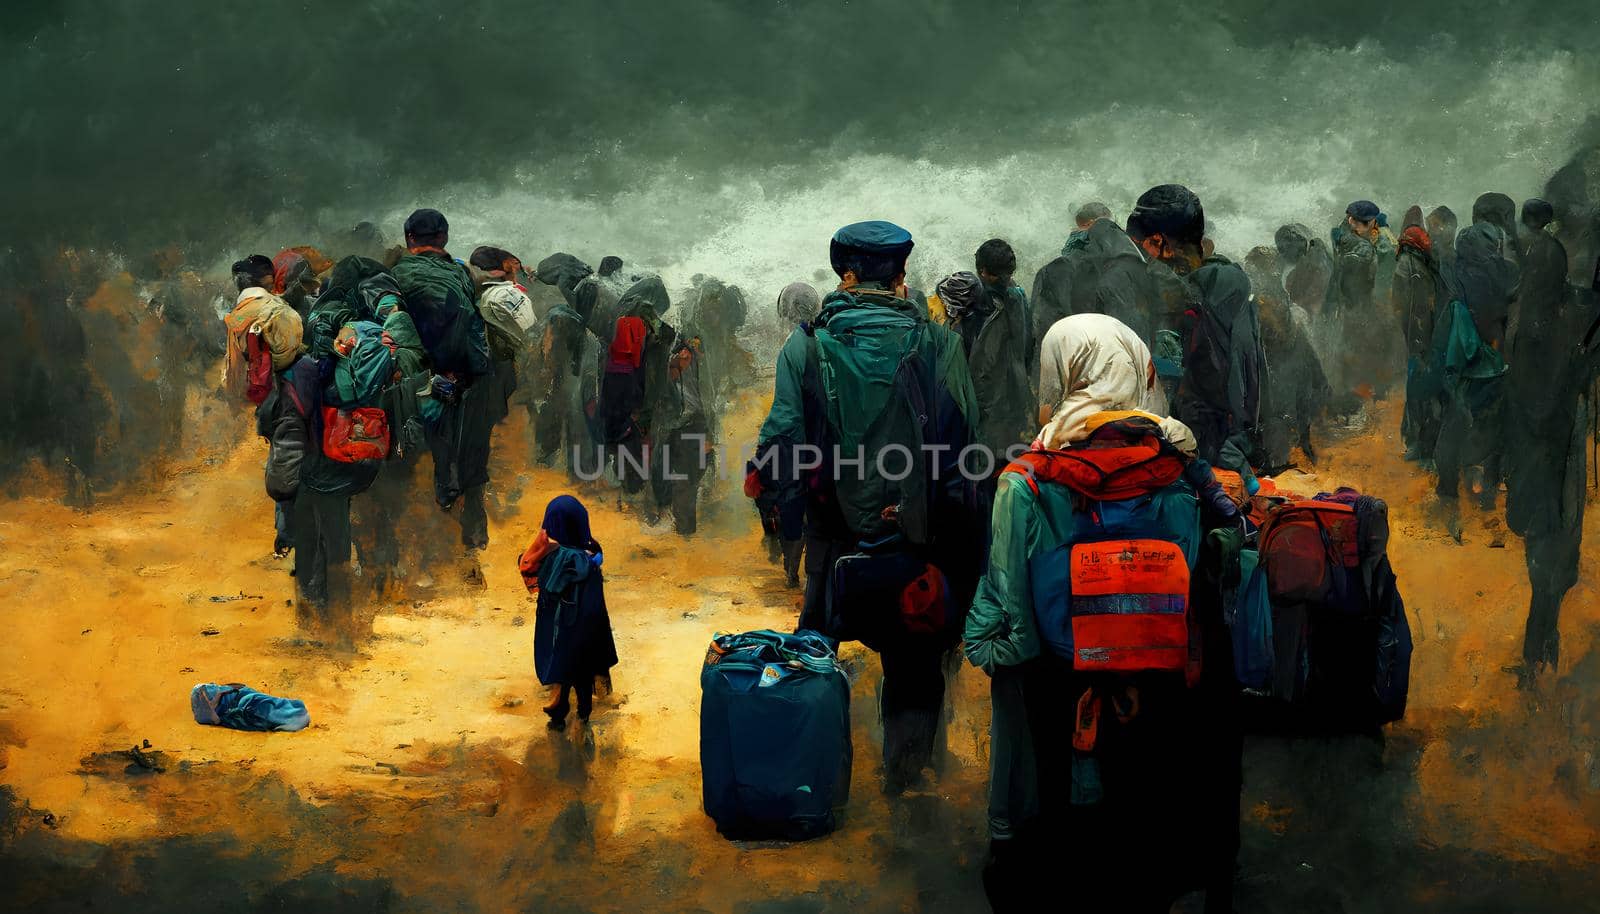 crowd of unrecognizable people with bags and backpacks walking - refugee crisis concept, neural network generated art. Digitally generated image. Not based on any actual scene or pattern.